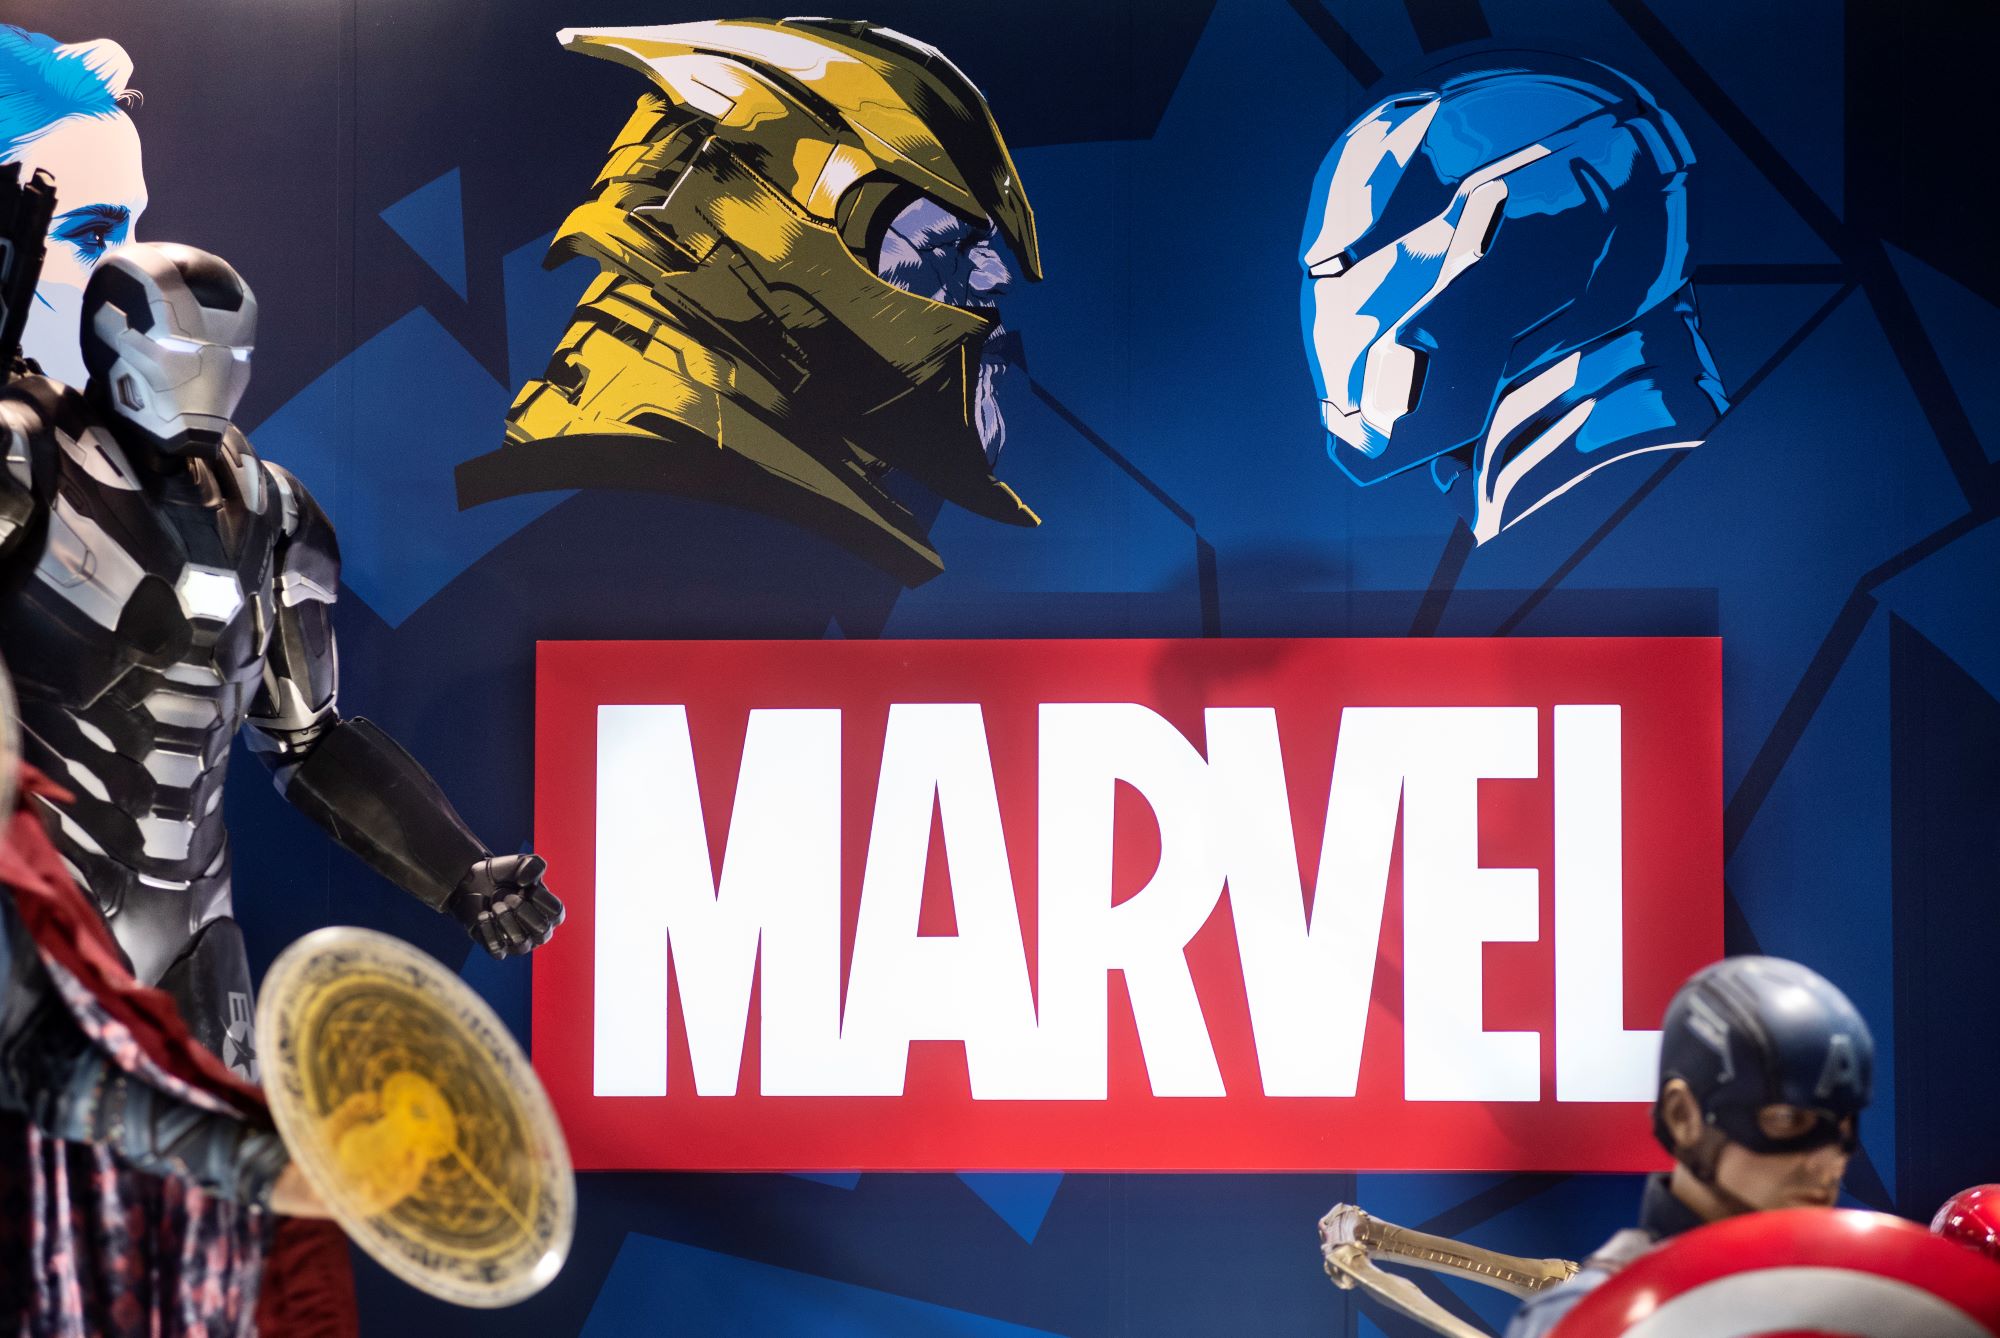 Marvel logo surrounded by representations of characters, such as Iron Man.